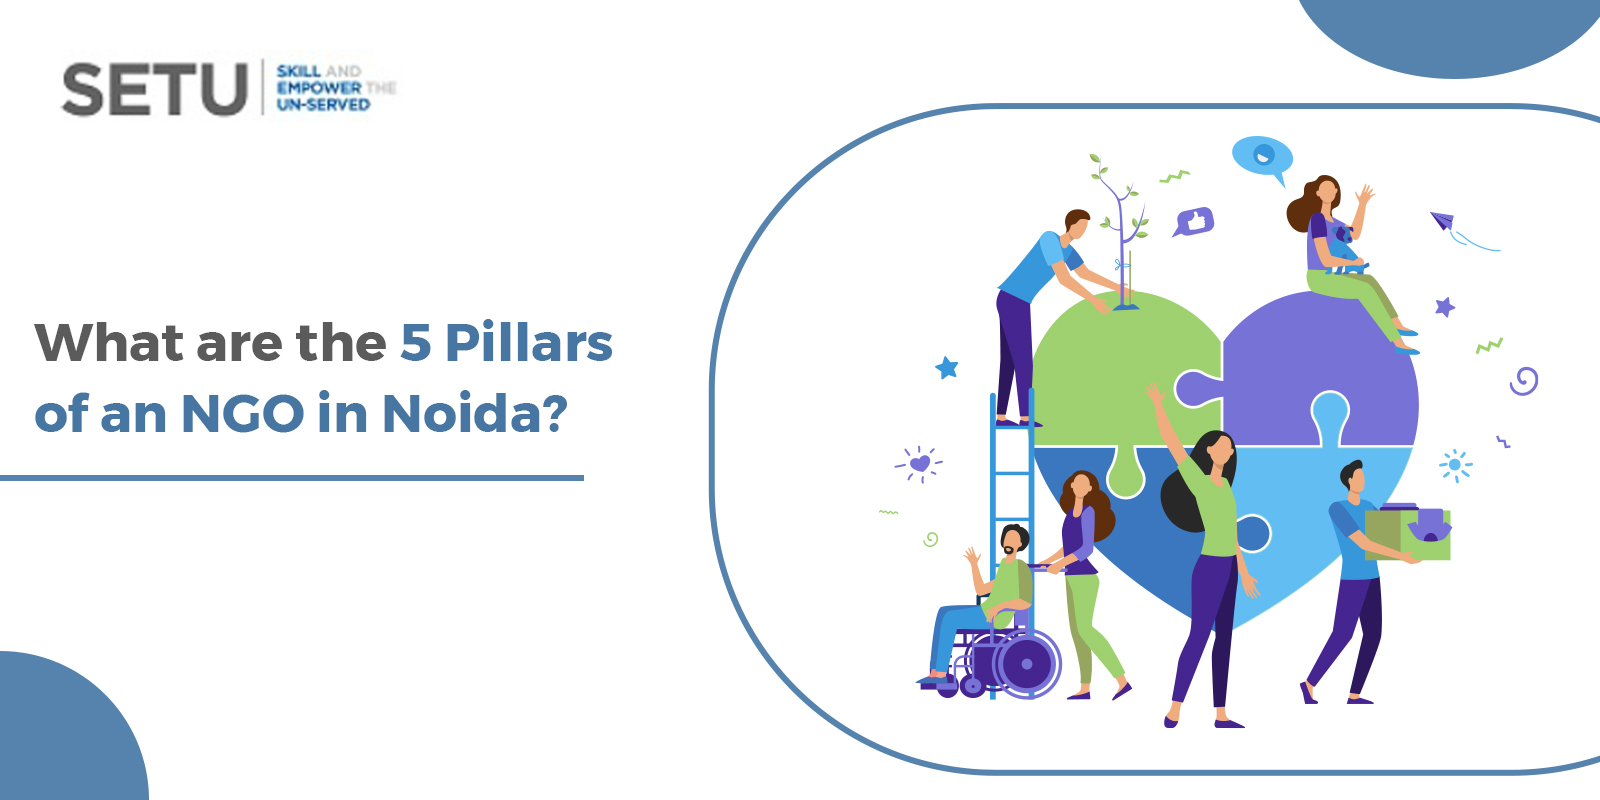 What are the 5 Pillars of an NGO in Noida